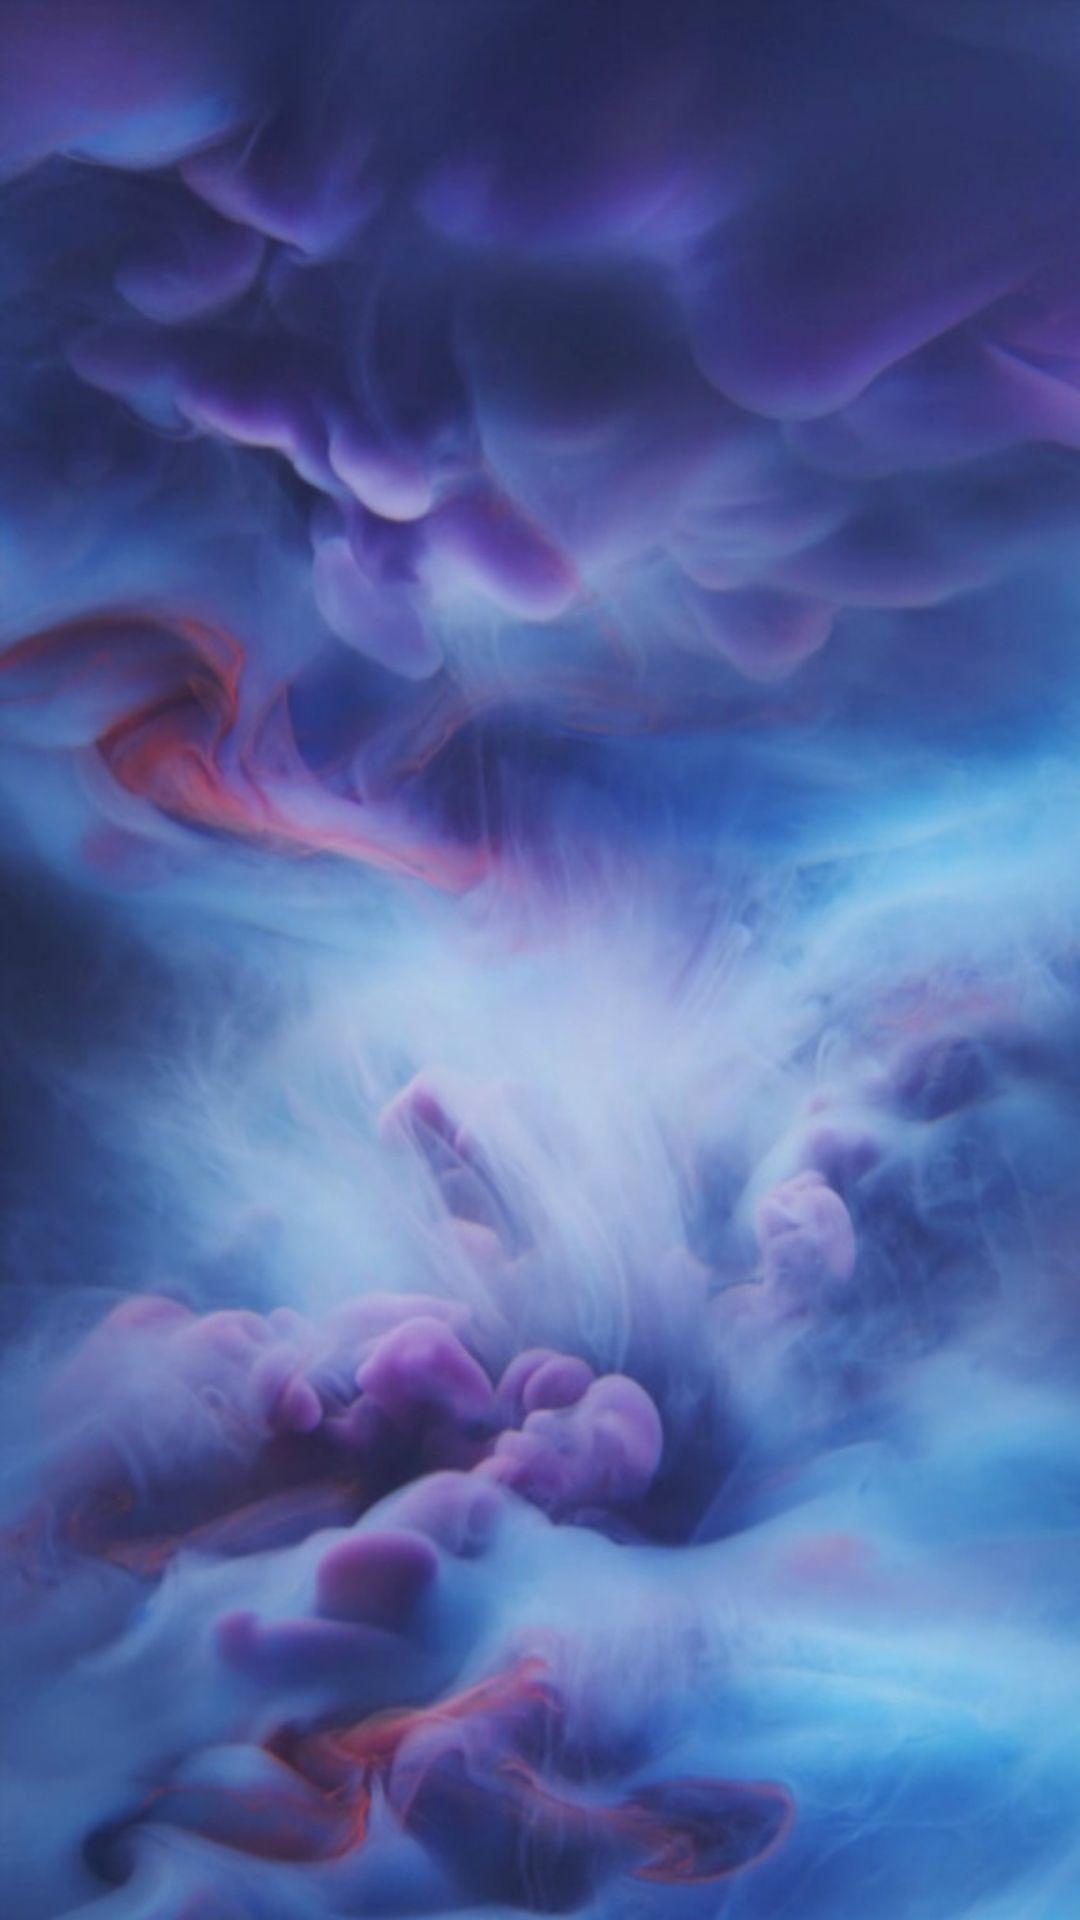 Abstract Thick Smoke Cloud Motion iPhone 8 Wallpaper. iPhone 6s